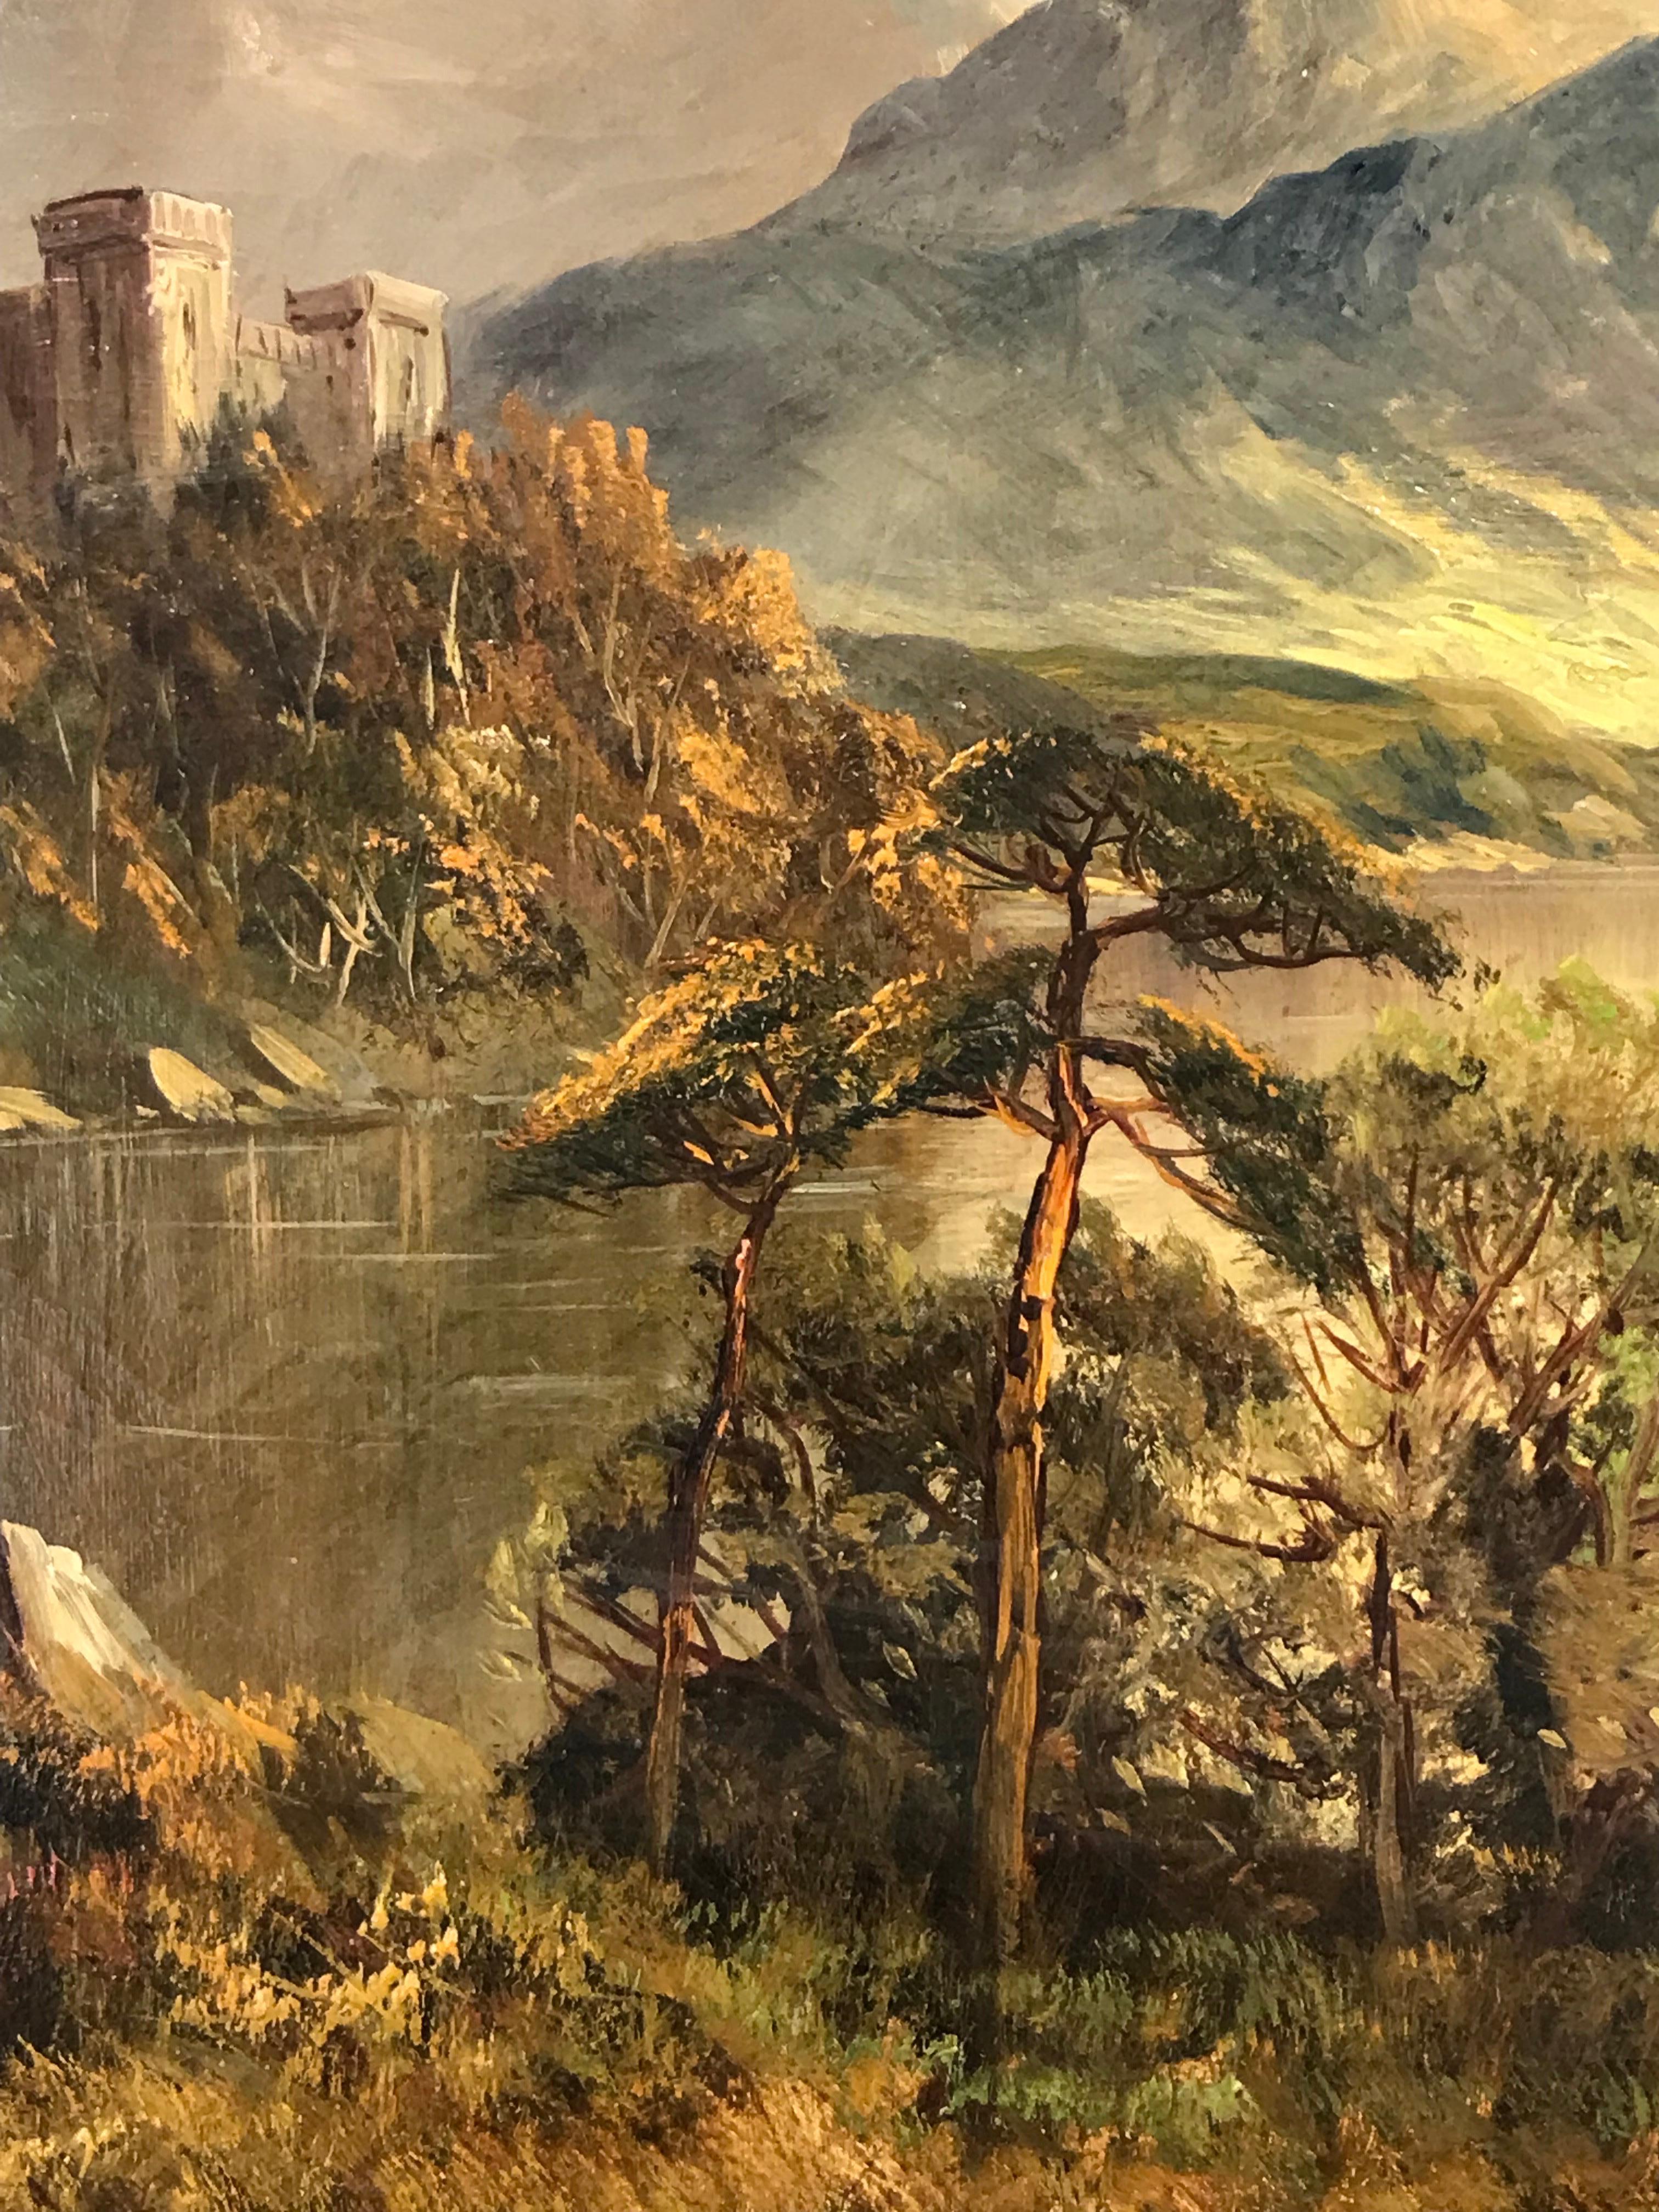 Artist/ School: F. E. Jamieson, British 1895-1950

Title: The Ancient Ruins over the Highland Loch

Medium: Oil on canvas, framed

Size:
framed: 25.5 x 35.5 inches
canvas : 20 x 30 inches

Provenance: from a collection in England. 

Condition: The